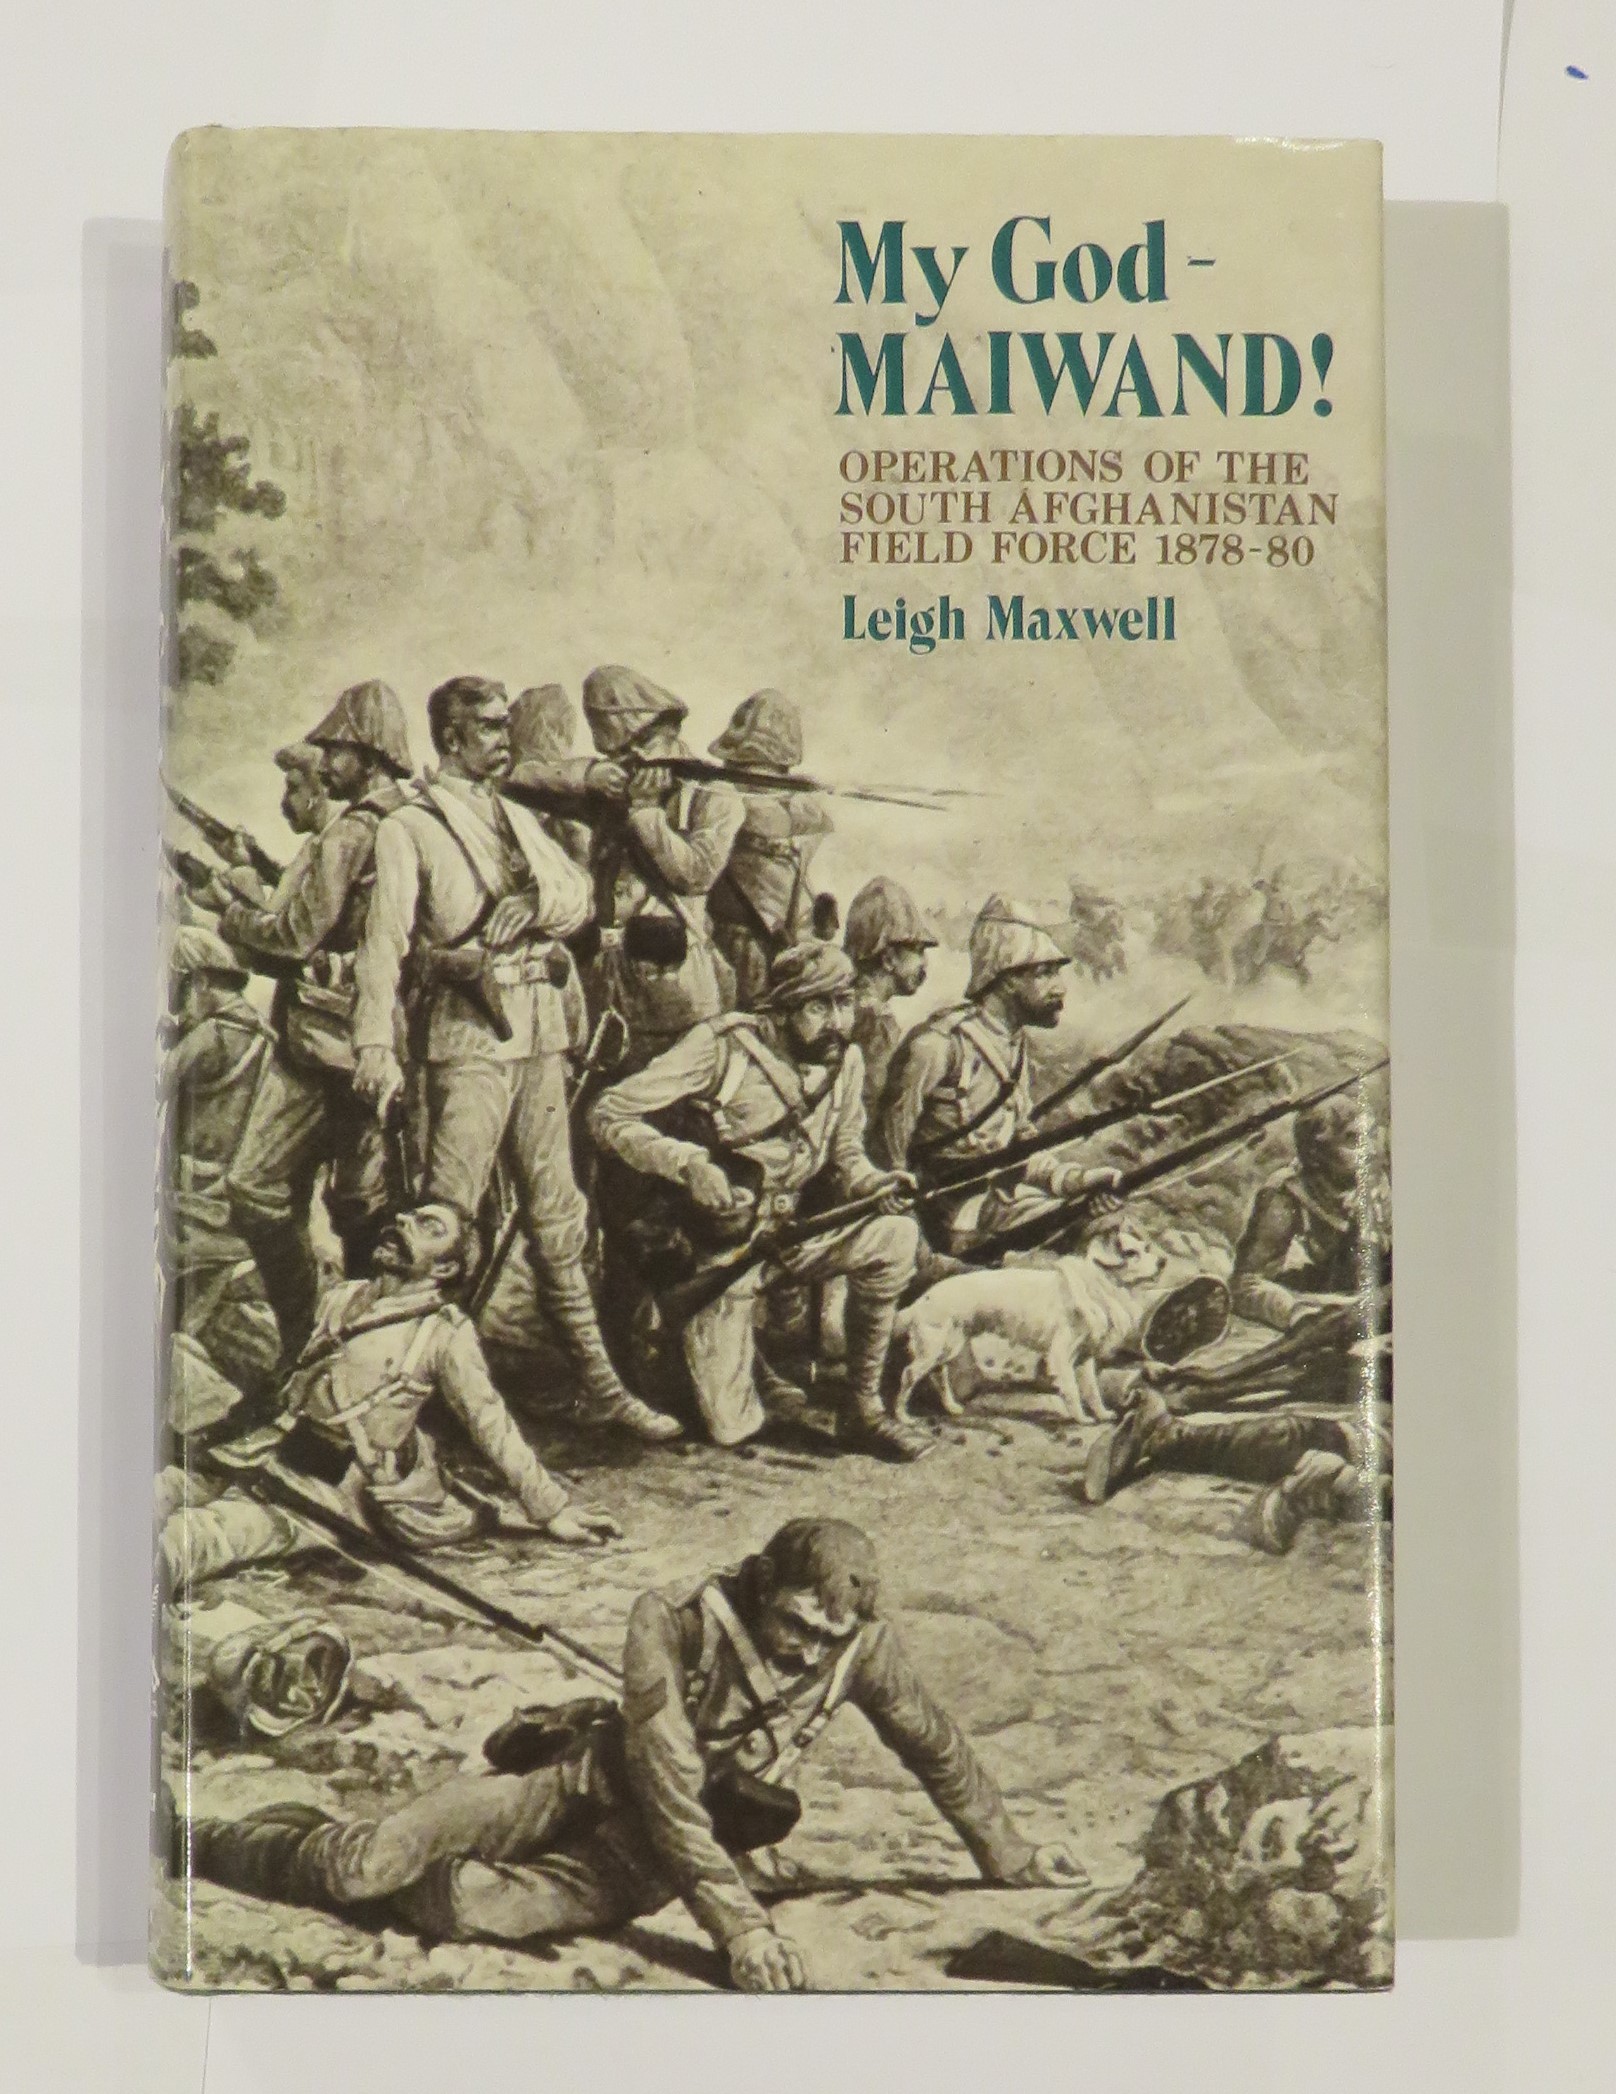 My God - Maiwand! Operations of the South Afghanistan Field Force 1878-80